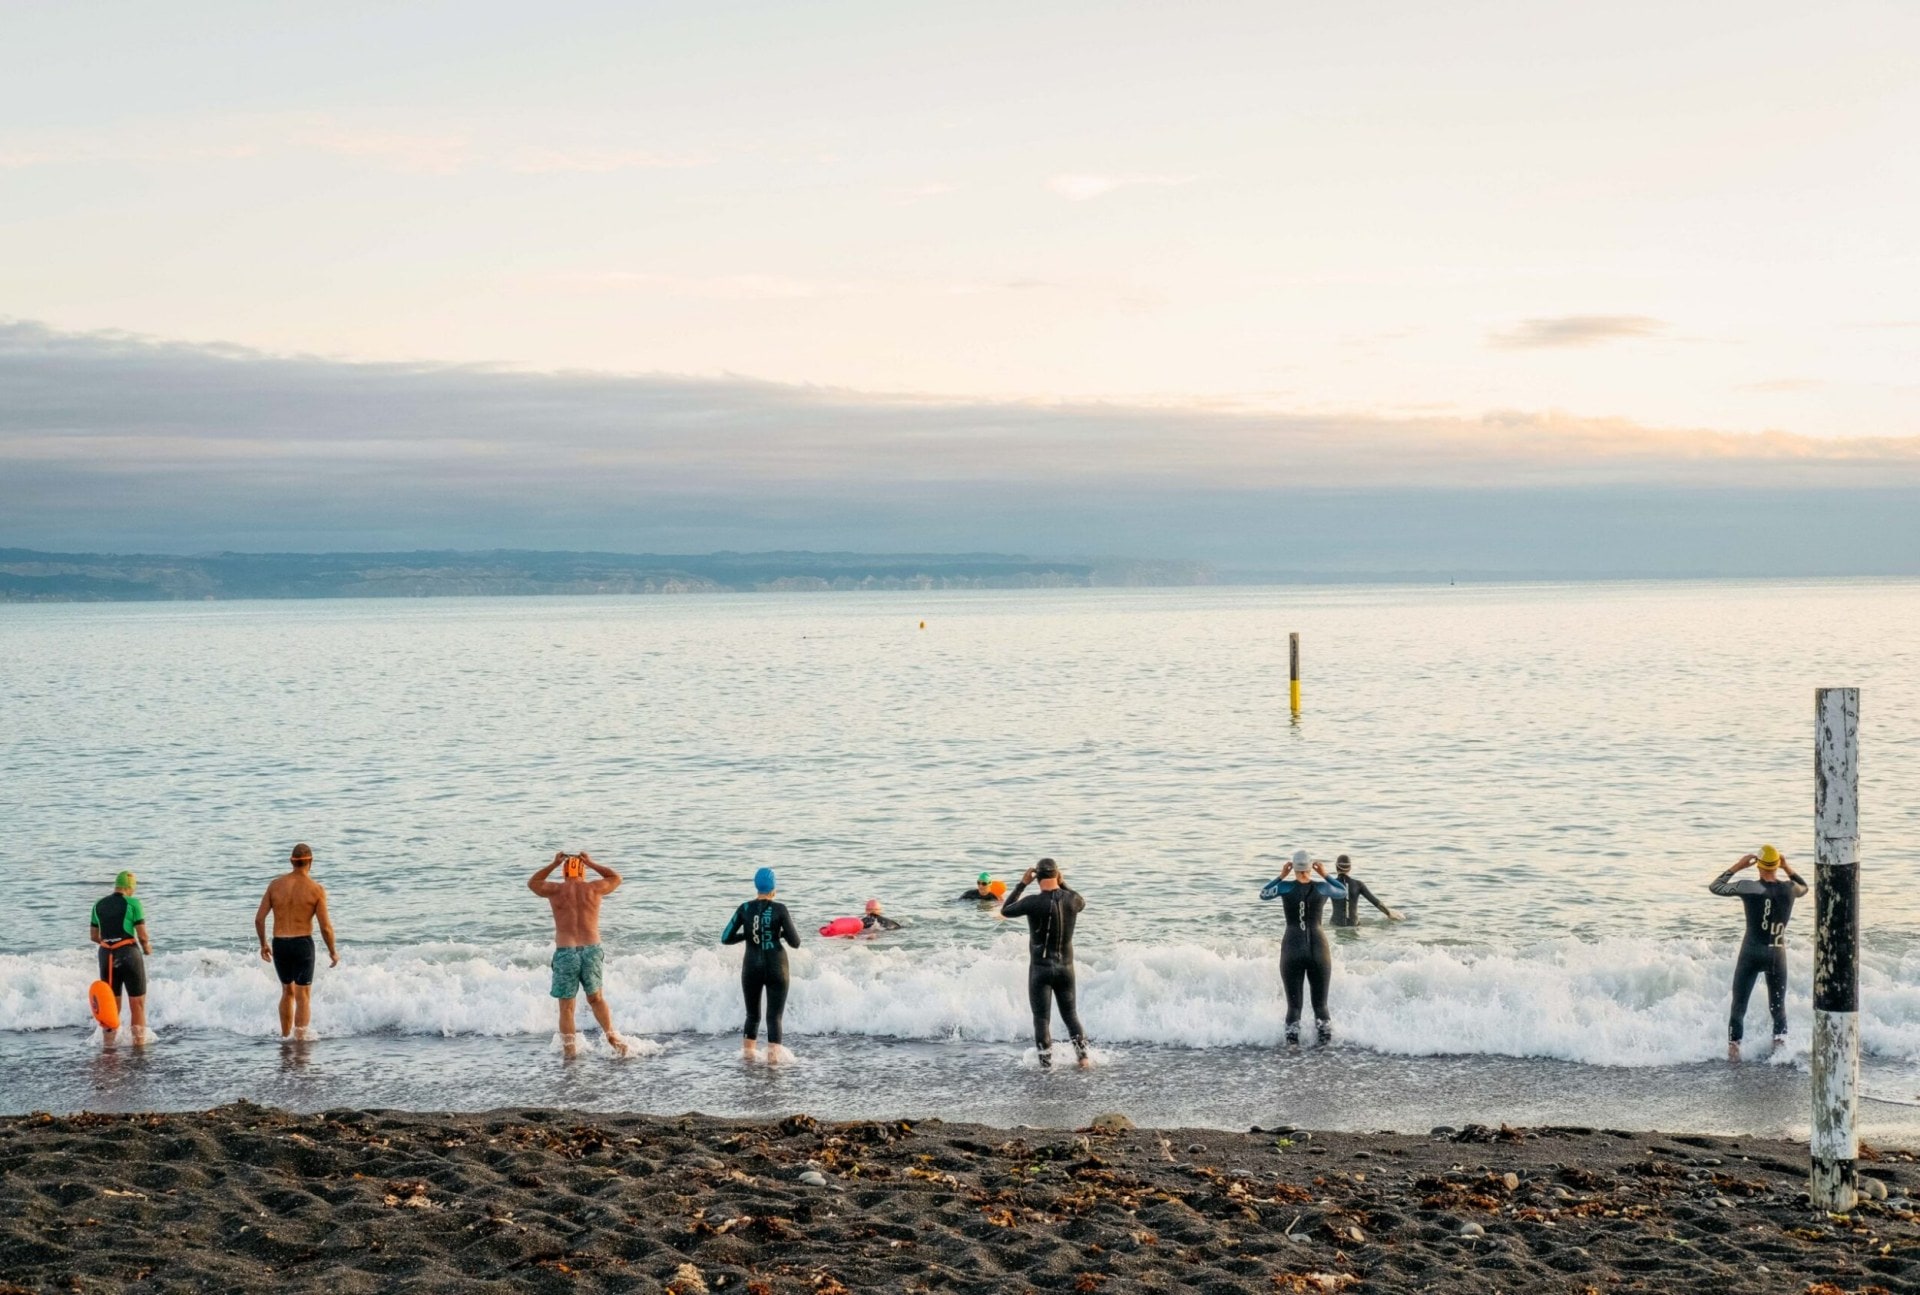 Swimmers preparing to swim at the edge of water